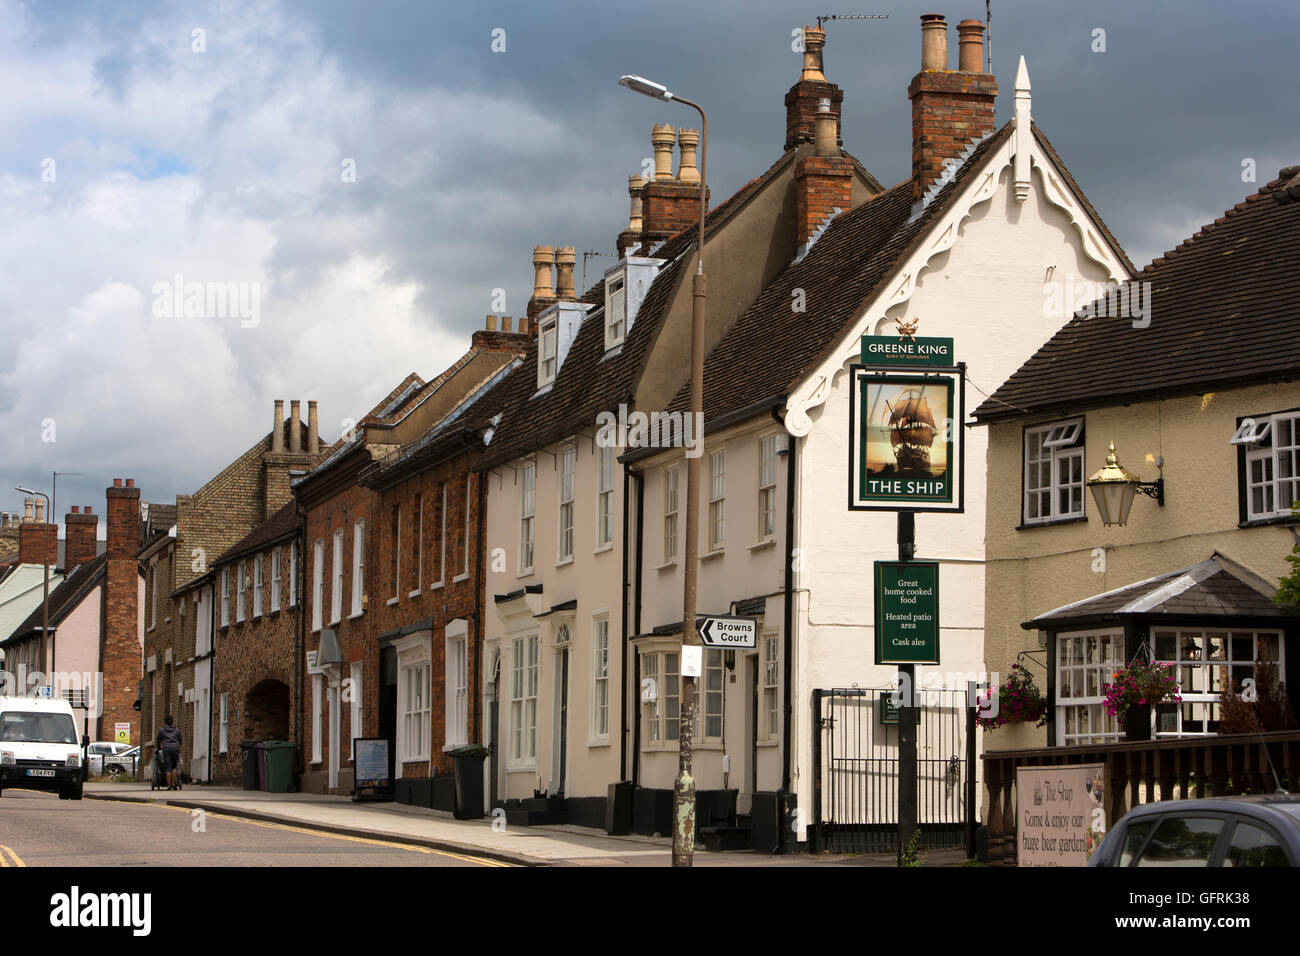 UK, England, Bedfordshire, Bedford, St Cuthbert Street, historic houses and Ship pub Stock Photo